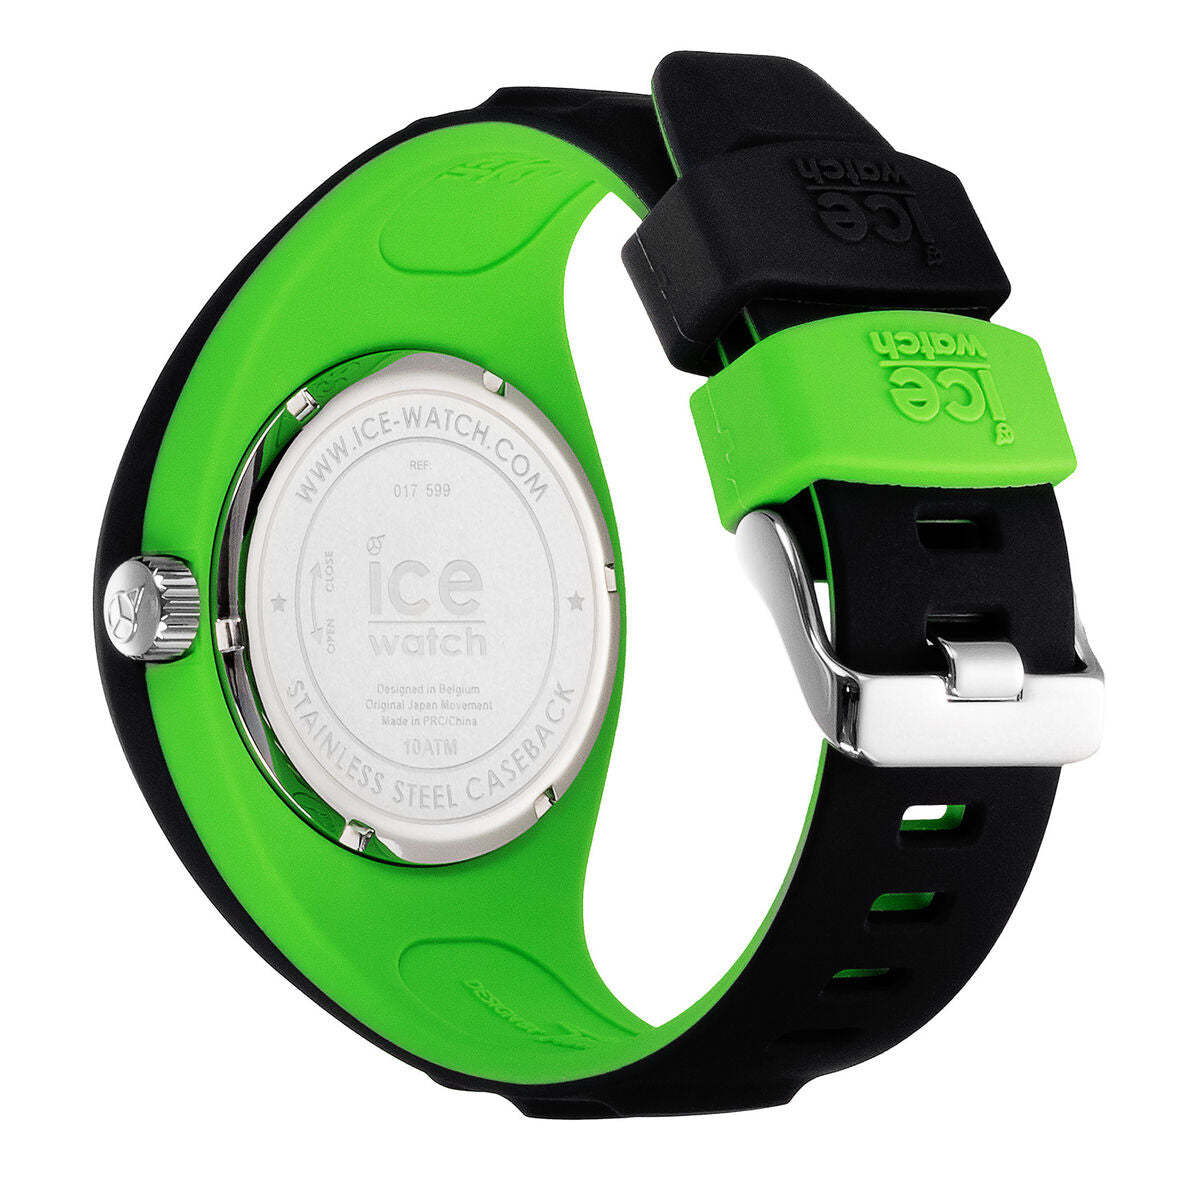 Men's Watch Ice IW017599 Ø 40 mm, Ice, Watches, Men, mens-watch-ice-iw017599-o-40-mm, Brand_Ice, category-reference-2570, category-reference-2635, category-reference-2994, category-reference-2996, category-reference-t-19667, category-reference-t-19724, category-reference-t-20349, Condition_NEW, fashion, original gifts, Price_50 - 100, RiotNook